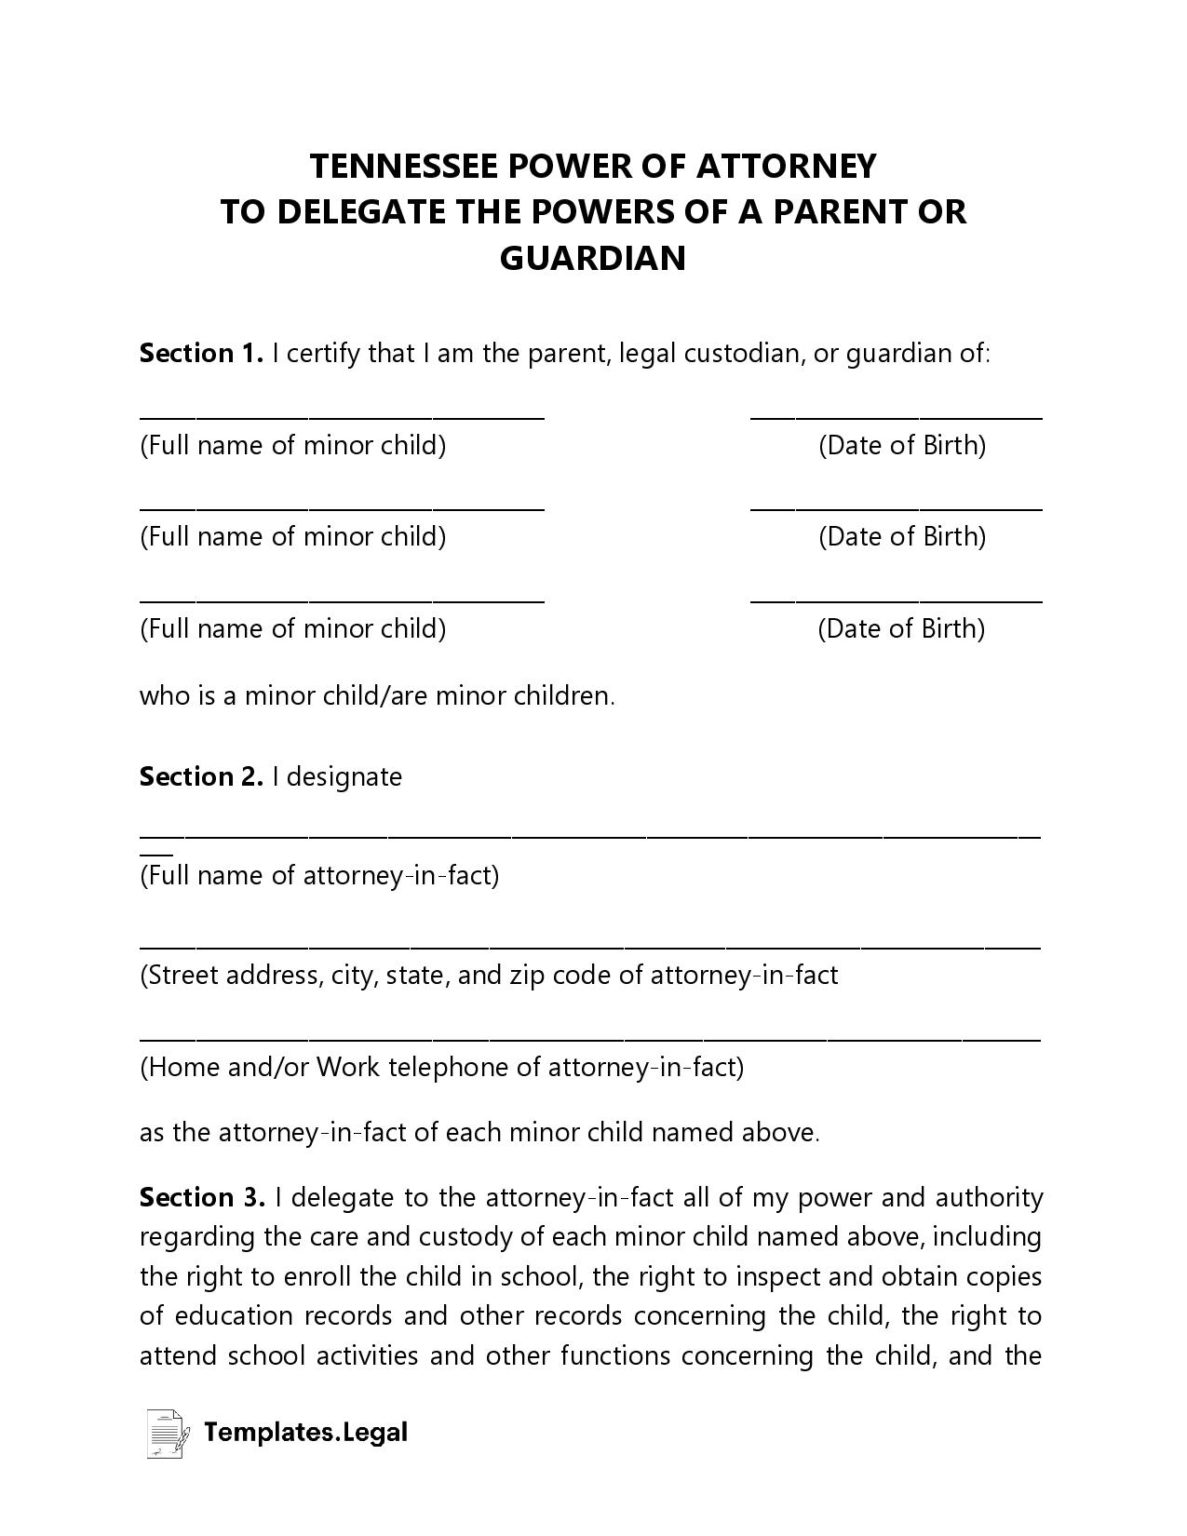 Tennessee Power of Attorney Templates (Free) Word PDF ODT